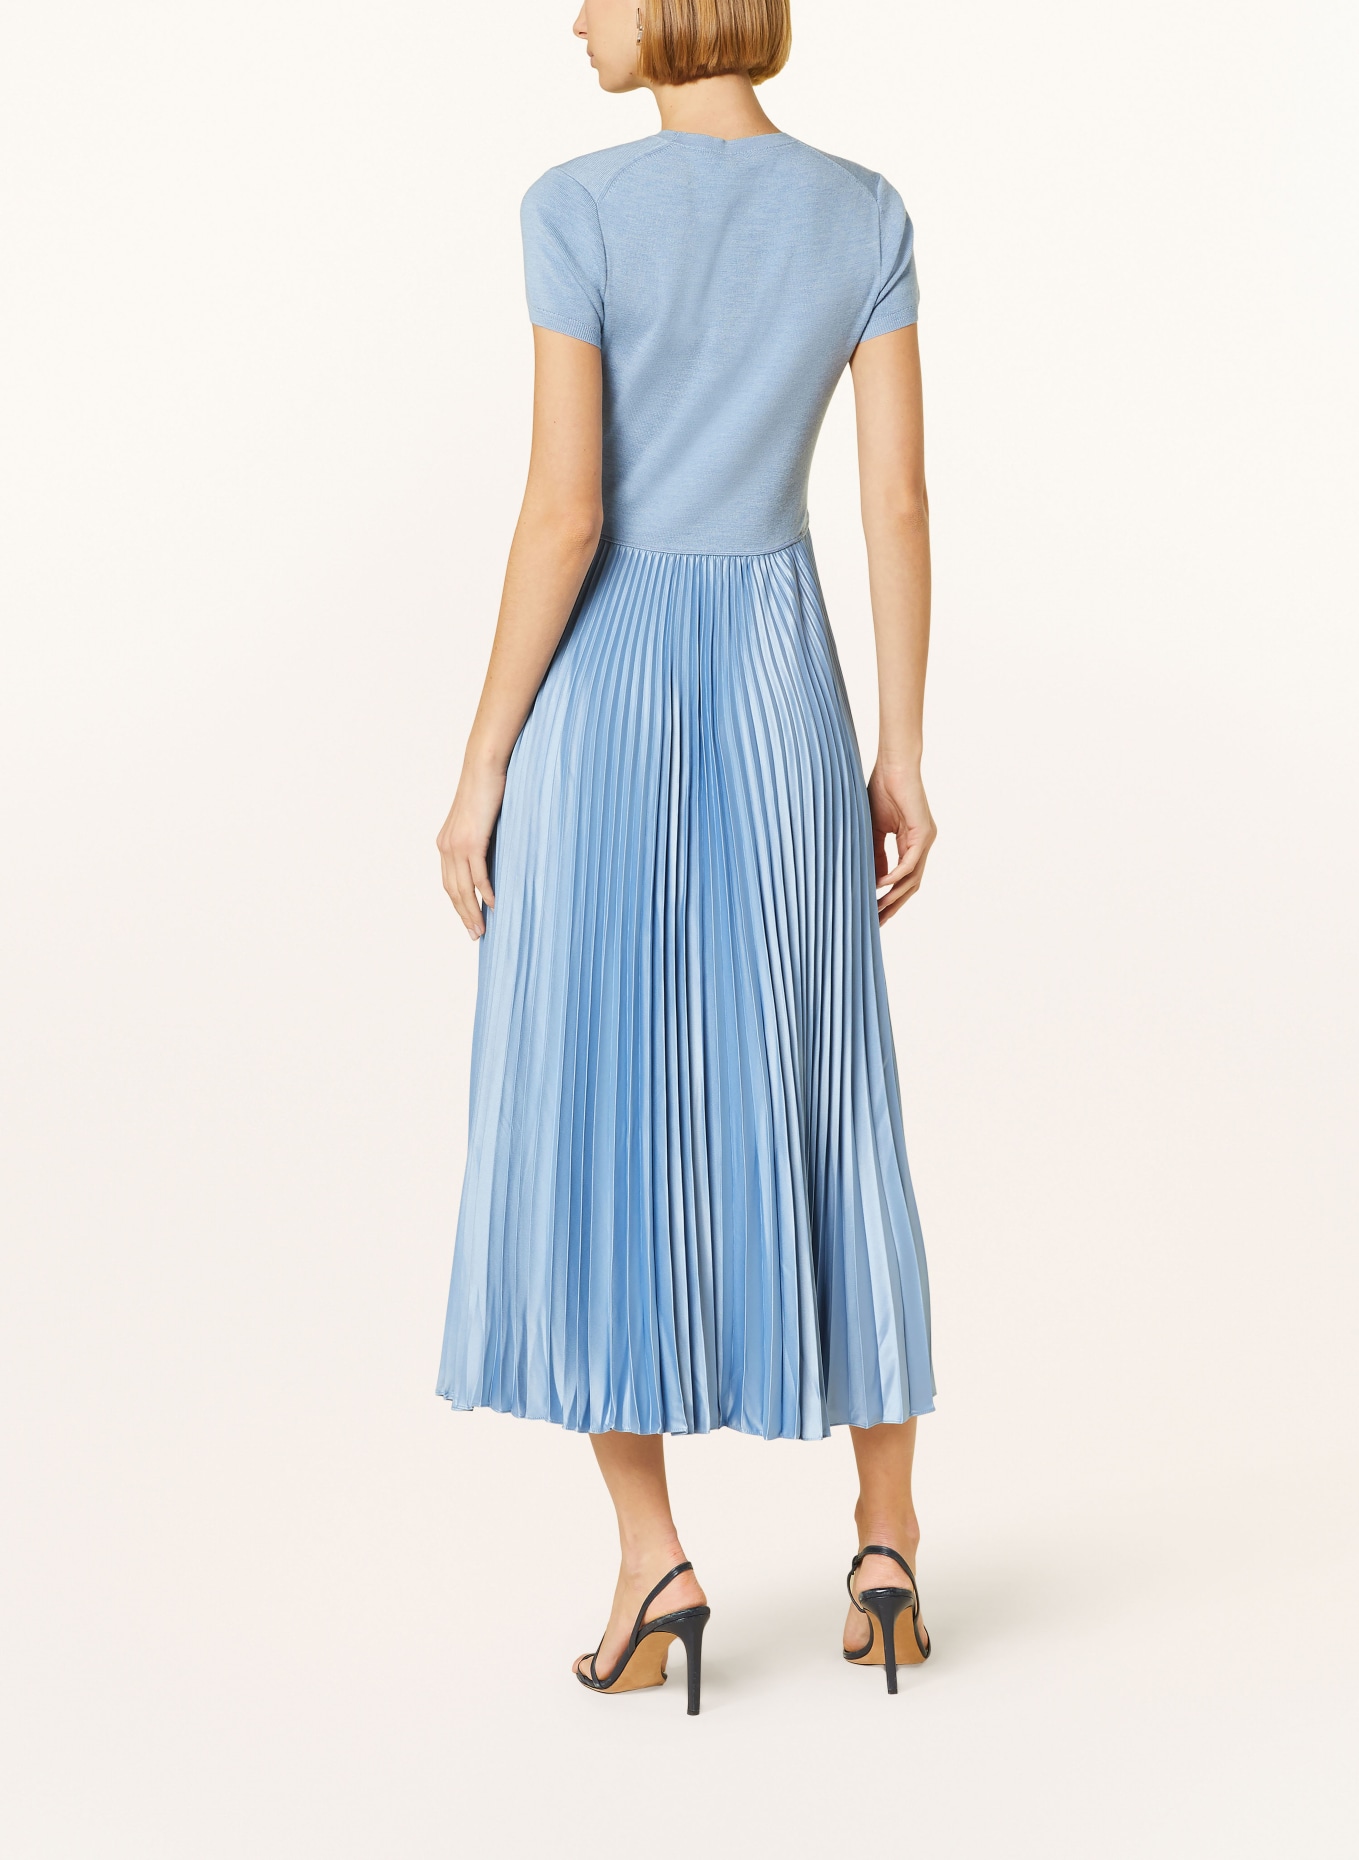 POLO RALPH LAUREN Dress in mixed materials, Color: LIGHT BLUE (Image 3)